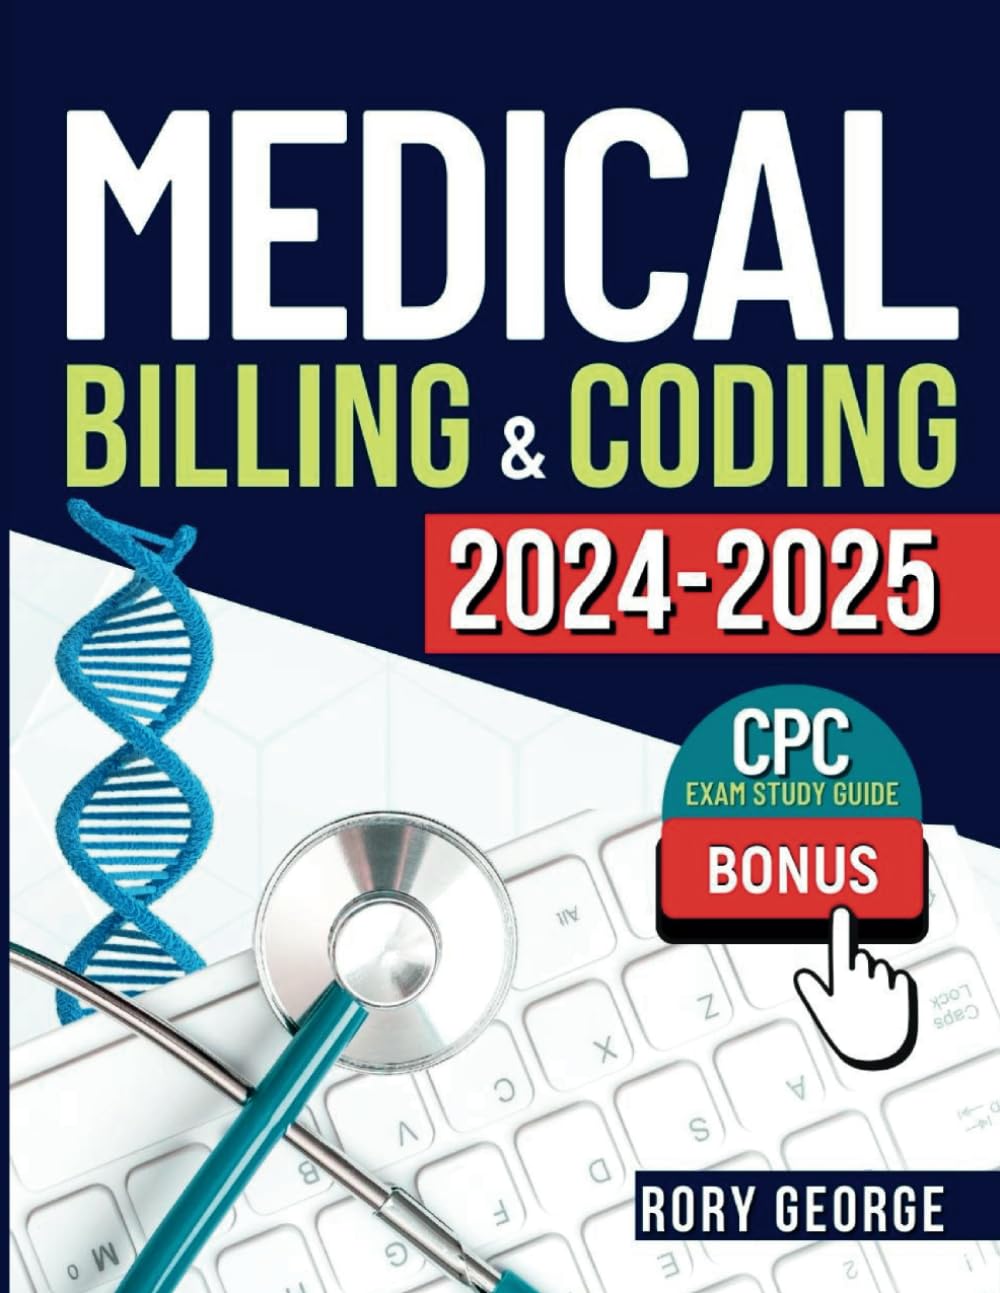 Medical Billing & Coding 2024-2025: Learn & Excel! Audio | Legal Guidelines | Q&A | CPC Study Guide | Extra Content